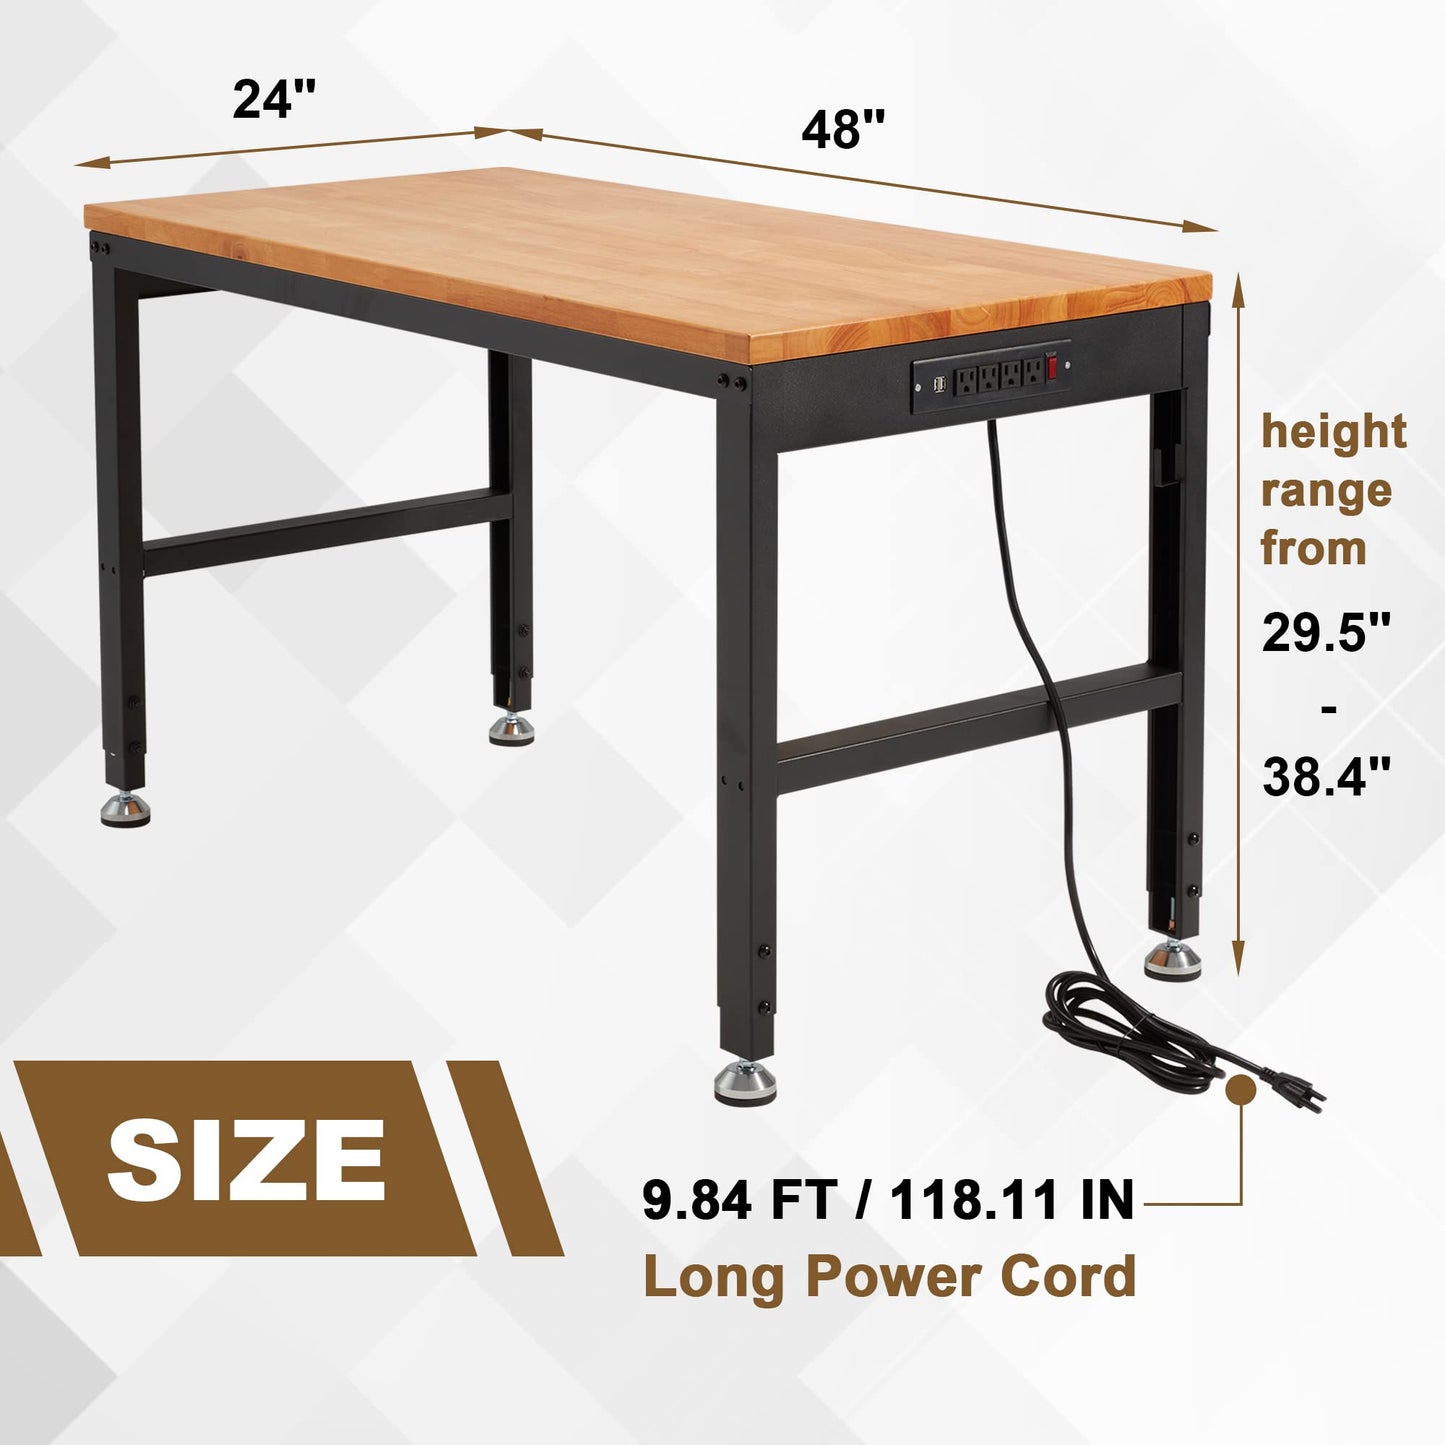 AHB 48" Workbench Adjustable Height, Oak Wood Work Table with Power Outlets, Max 2000 LBS, Heavy Duty Work Bench for Garage Party Shop Office